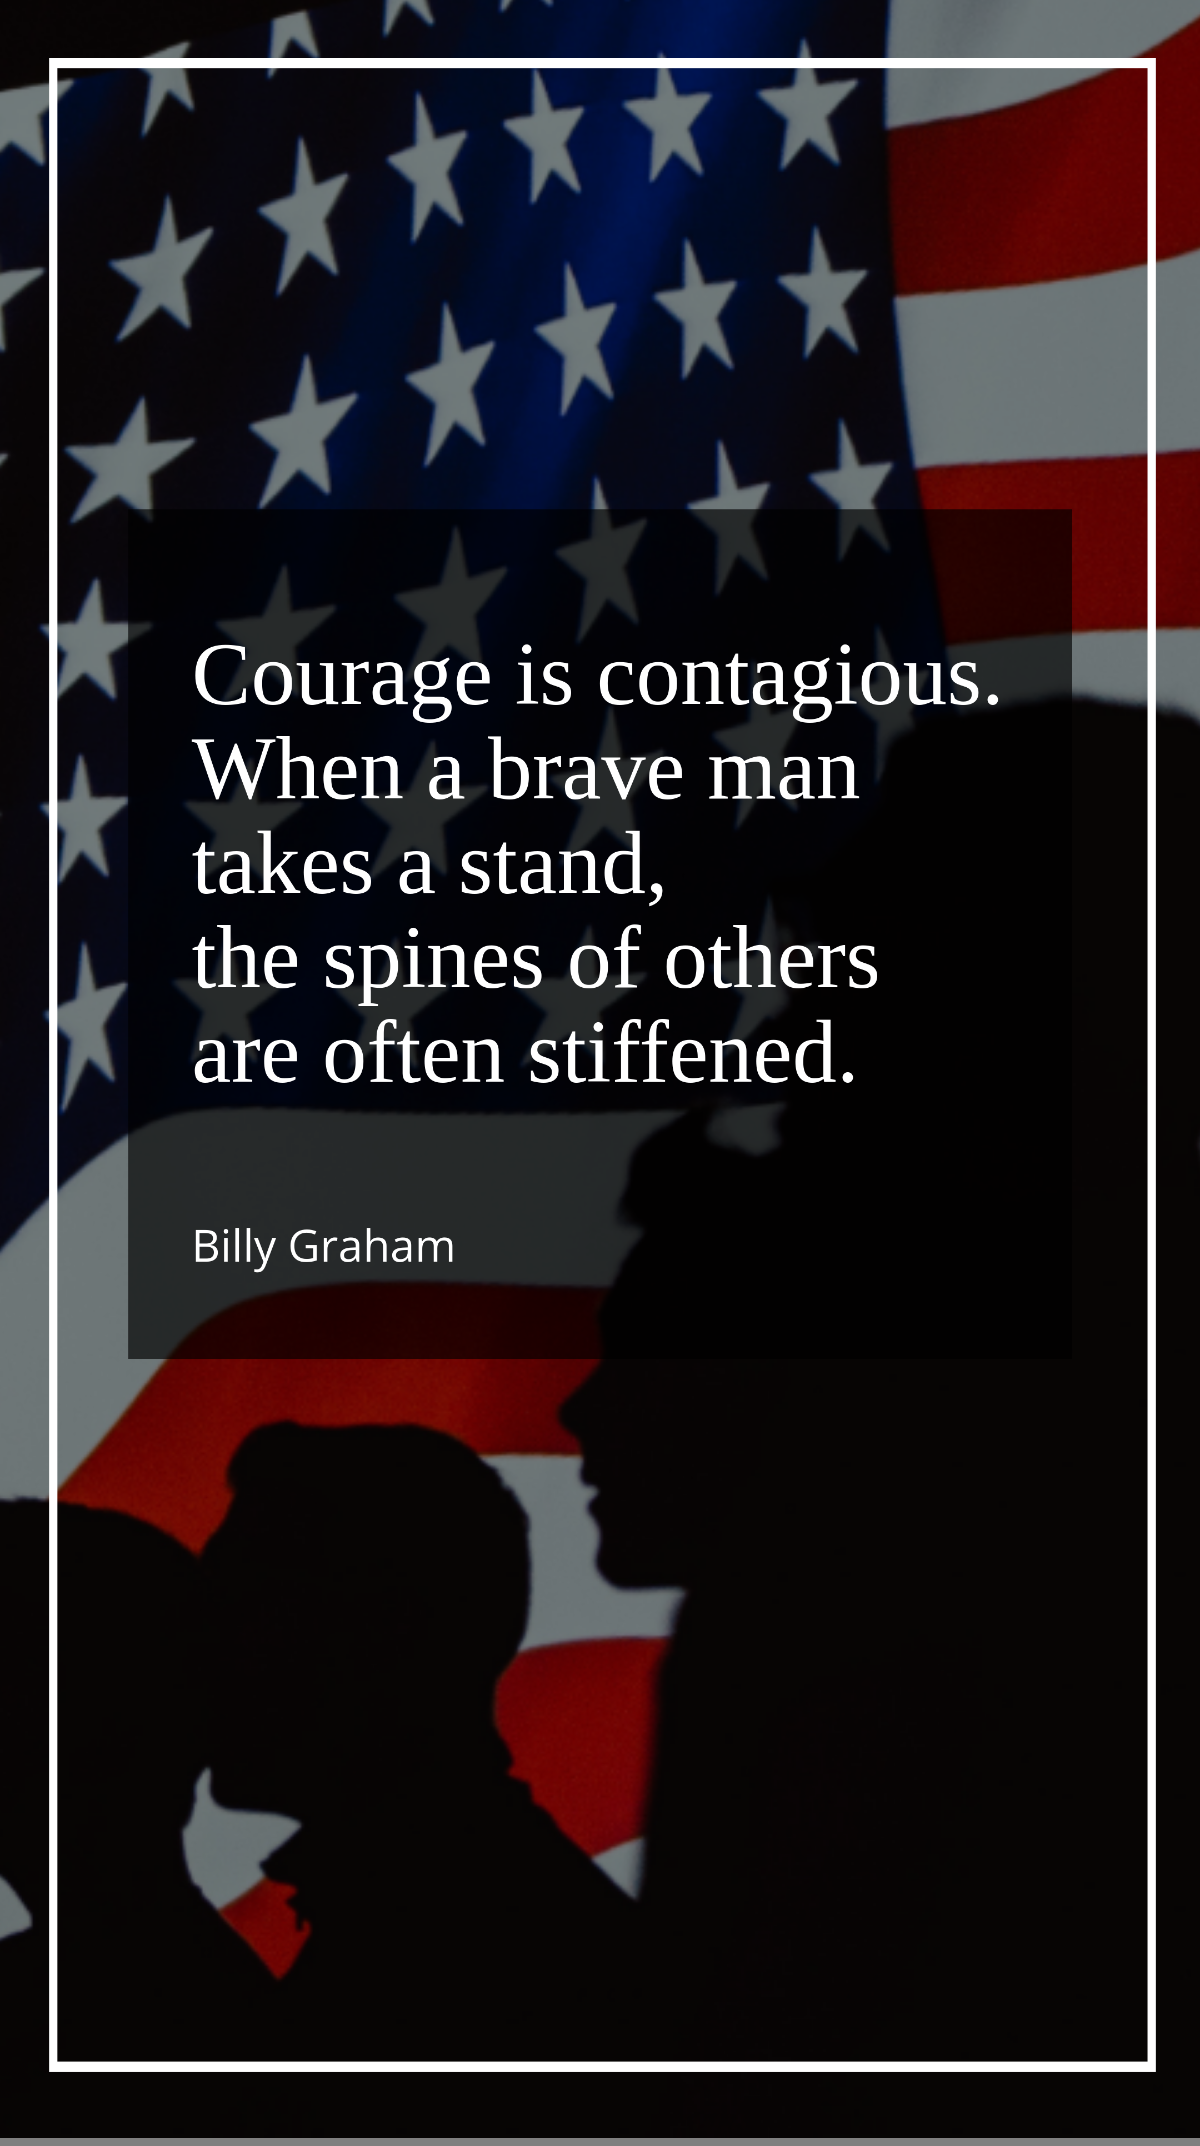 Billy Graham - Courage is contagious. When a brave man takes a stand, the spines of others are often stiffened.